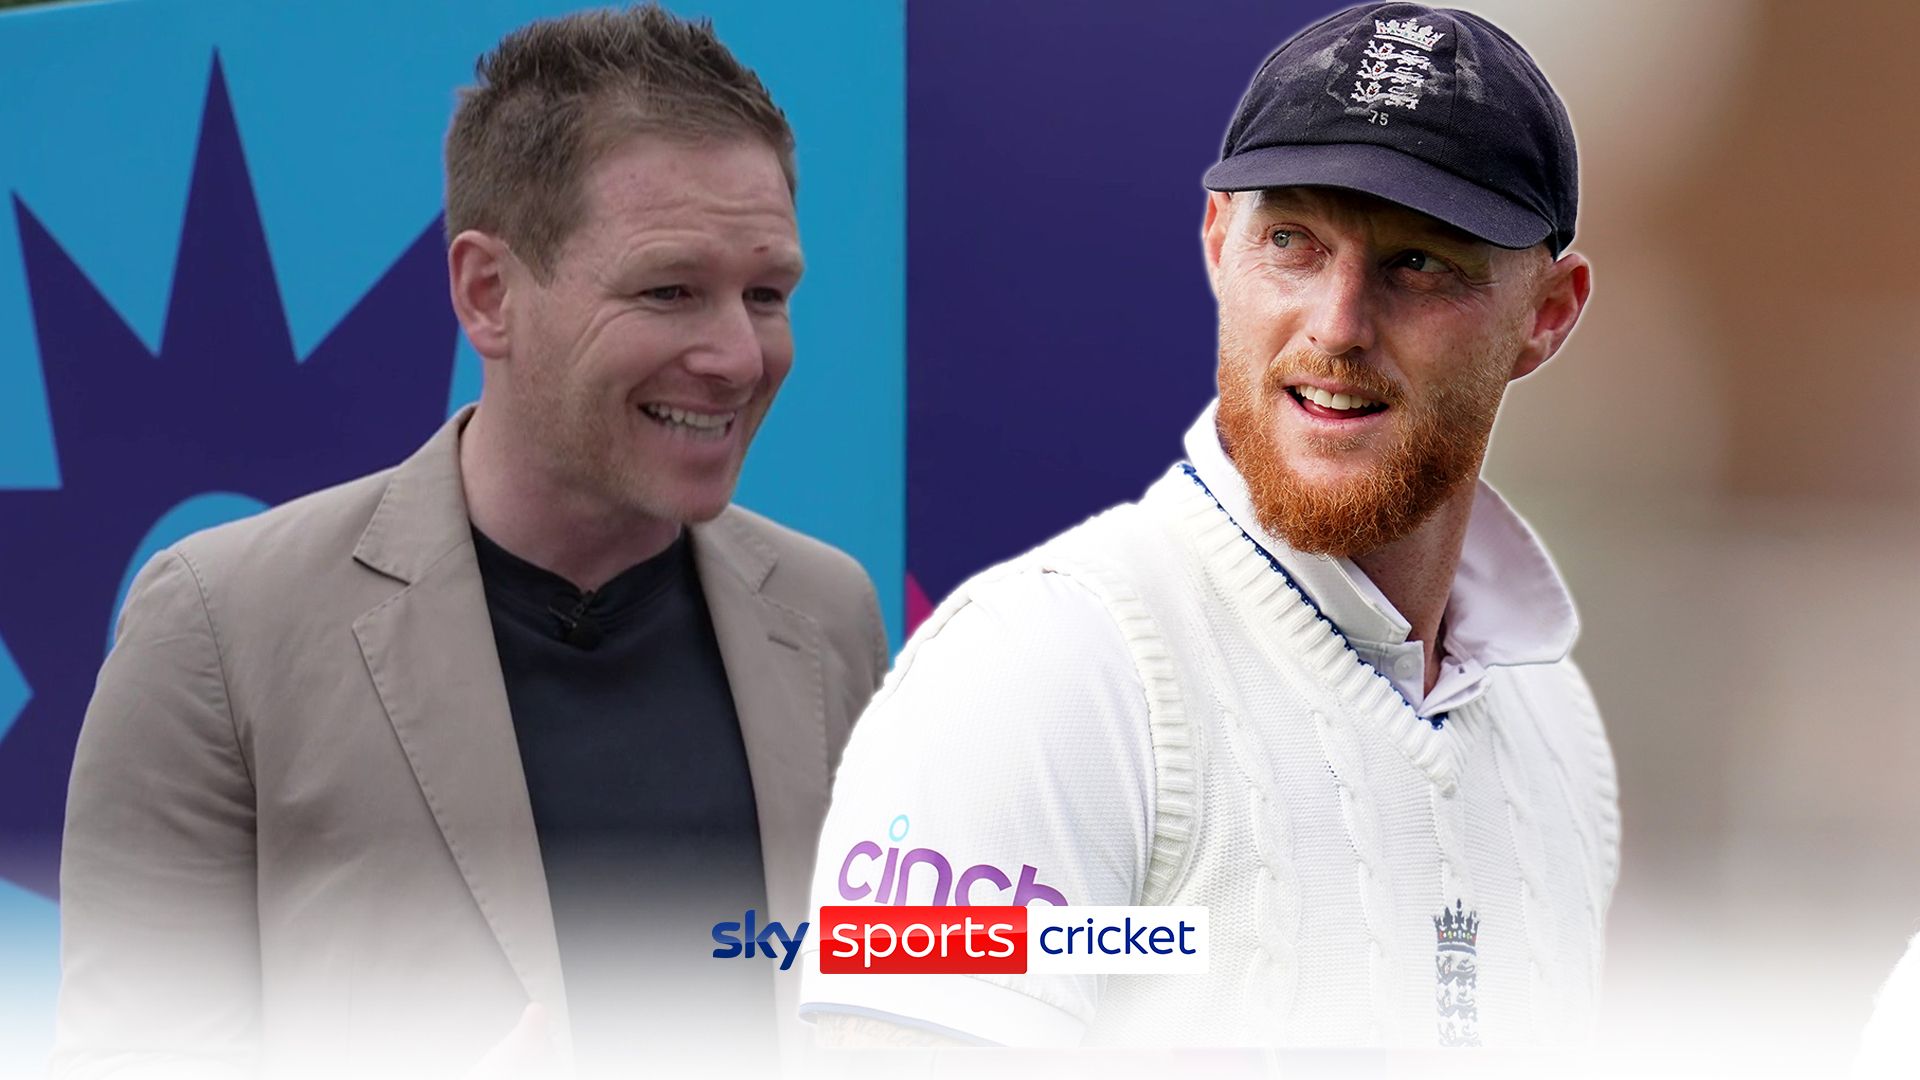 'England better with Stokes in team - tough Brook call the right one'